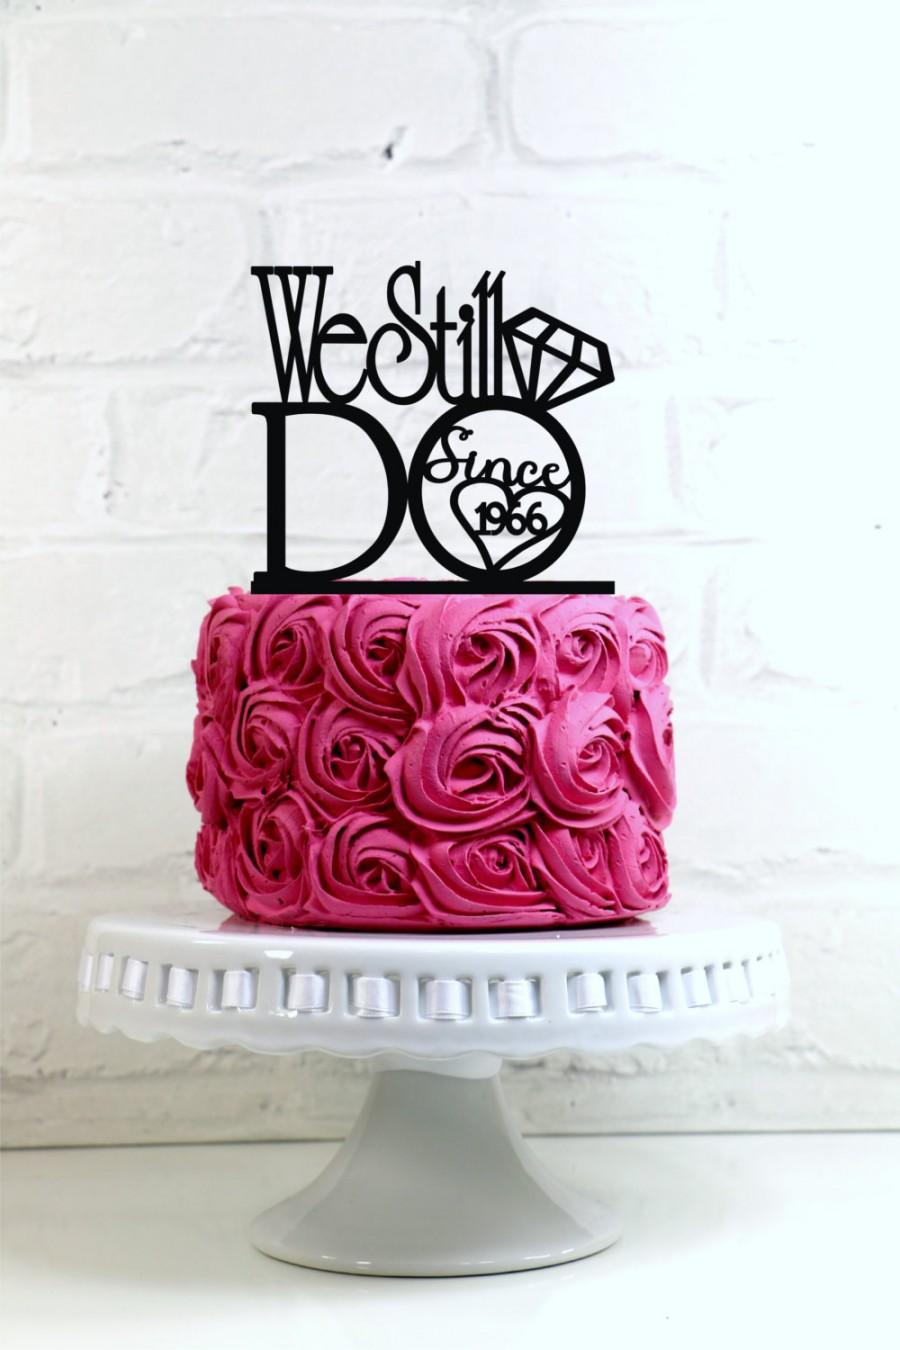 Wedding - We Still Do "Since 'Your Year'" Vow Renewal or Anniversary Cake Topper or Sign with a ring